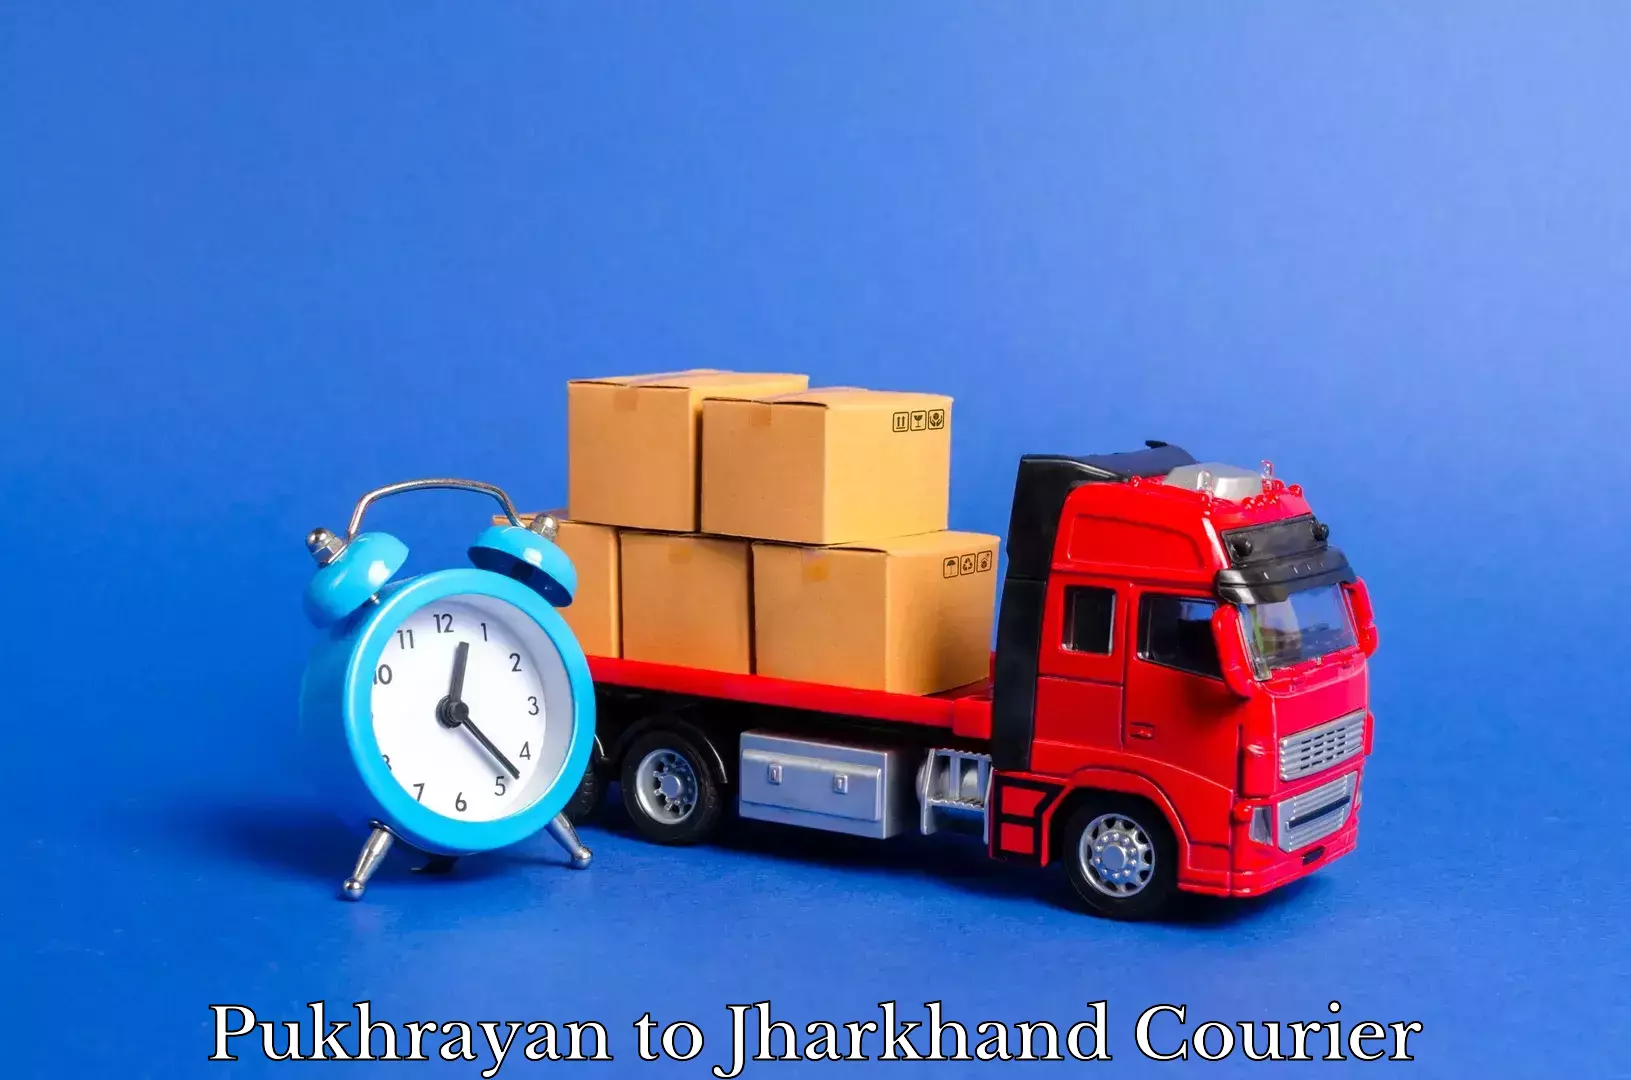 Trusted household movers in Pukhrayan to Topchanchi